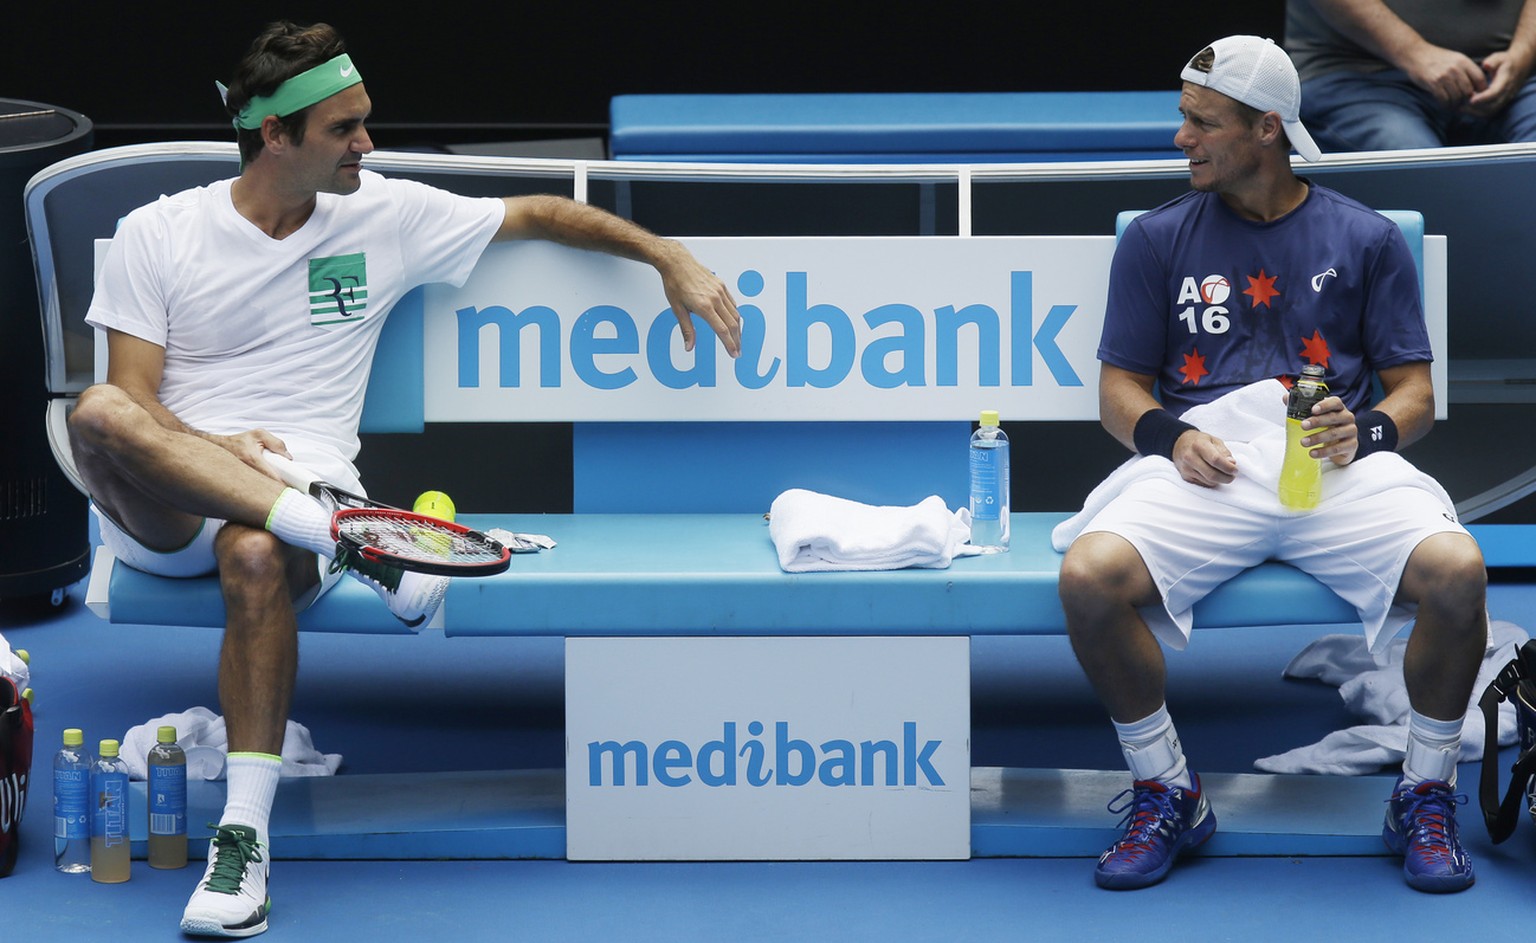 Switzerland&#039;s Roger Federer, left, talks with Australia&#039;s Lleyton Hewitt during a practice session on Rod Laver Arena ahead of the Australian Open tennis championships in Melbourne, Australi ...